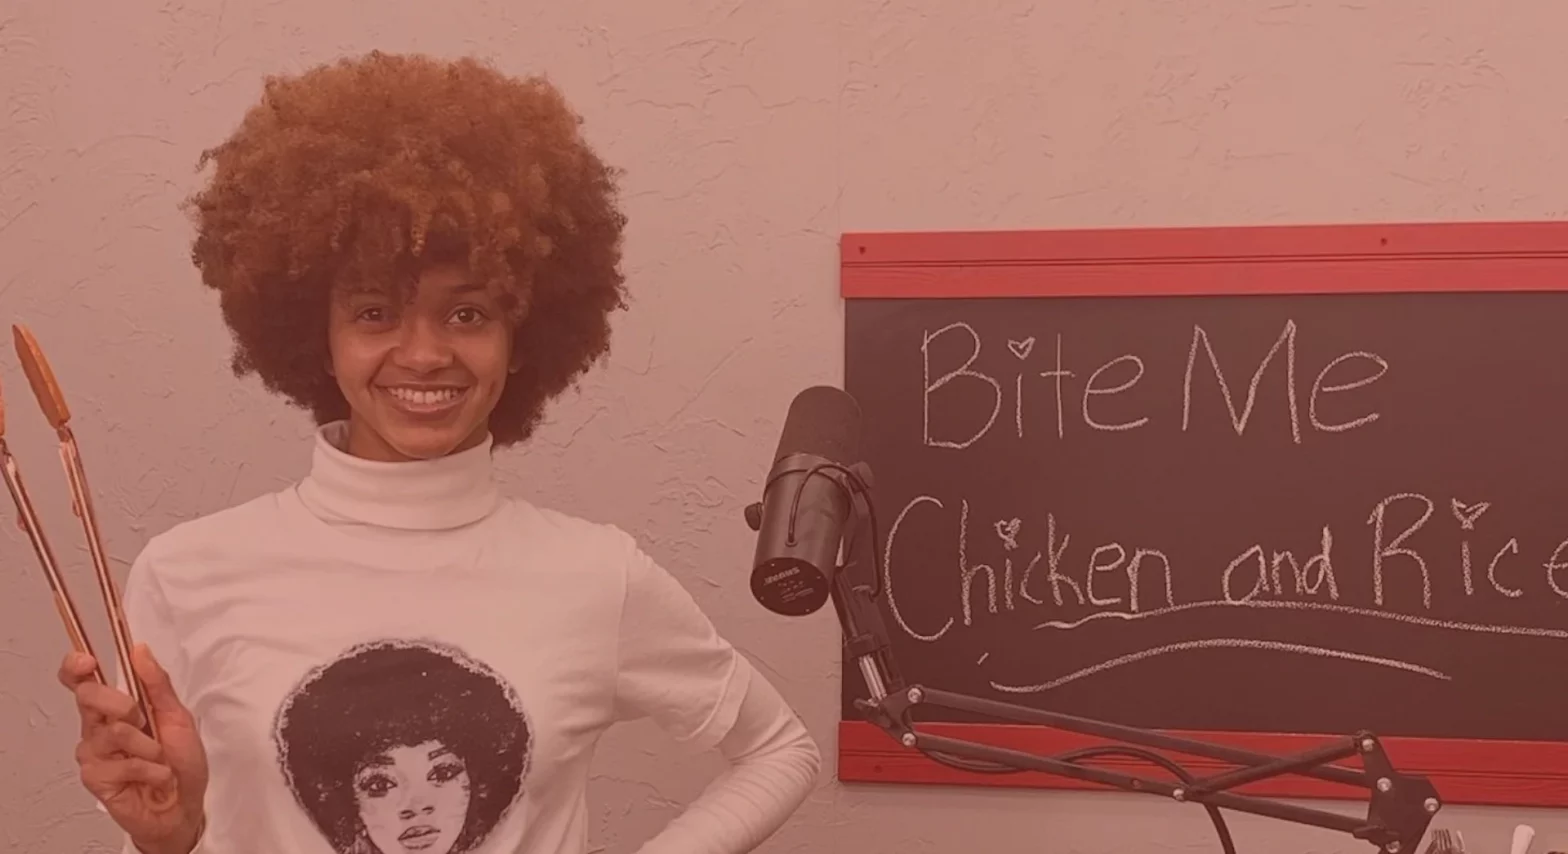 Meet the 23-Year-Old Who Went From Food Allergies To Building Her Own Seasoning Brand